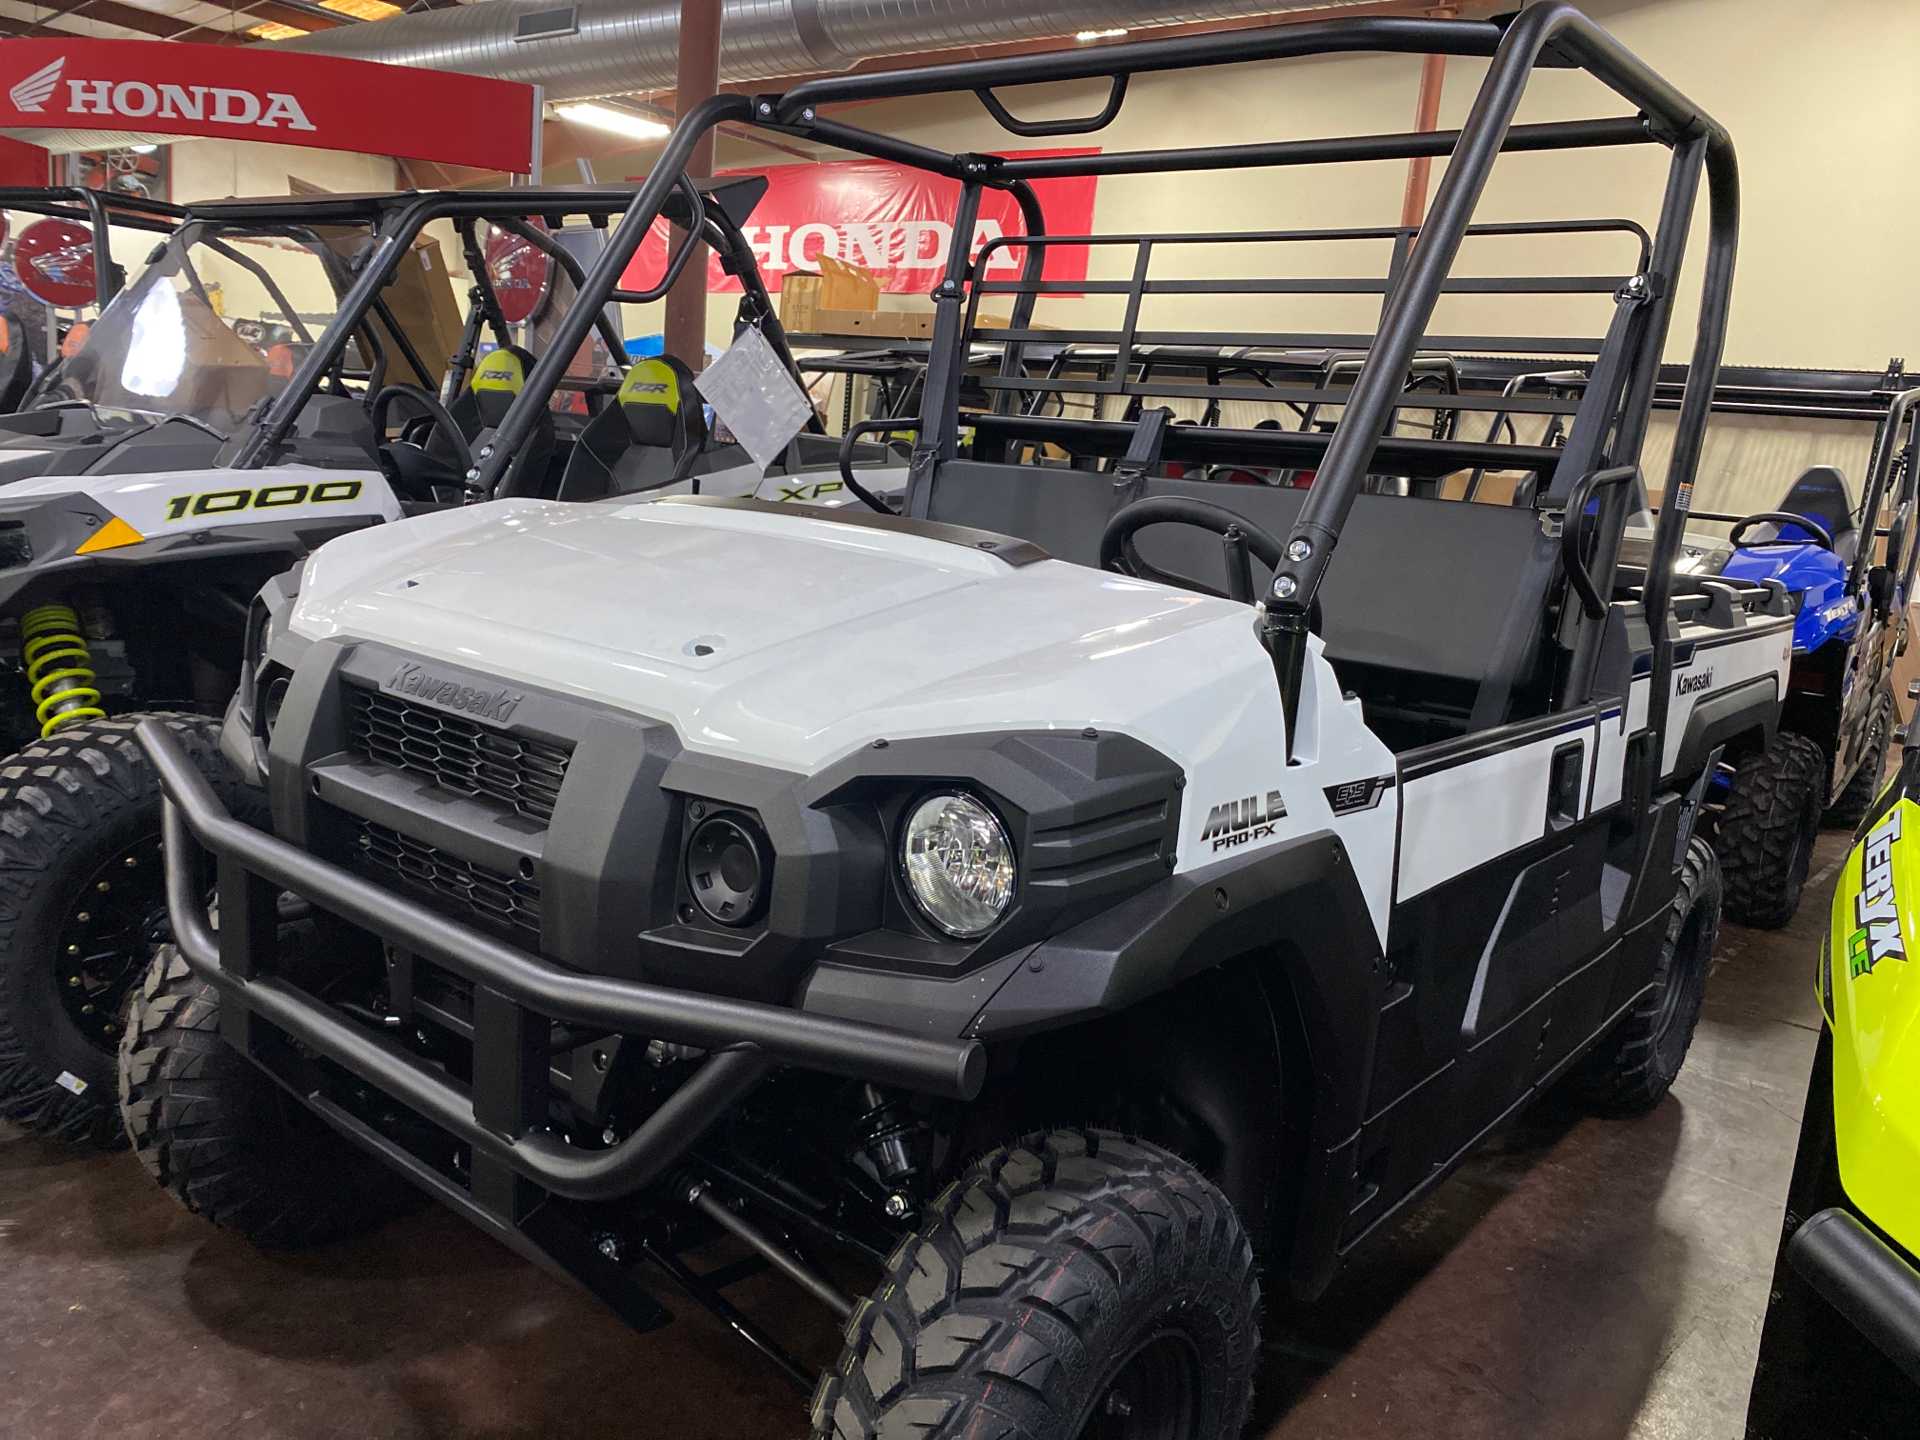 redaktionelle bekræfte th New 2021 Kawasaki Mule PRO-FX EPS Utility Vehicles in Statesville, NC |  Stock Number: 510497 - greatwesternmotorcycles.com